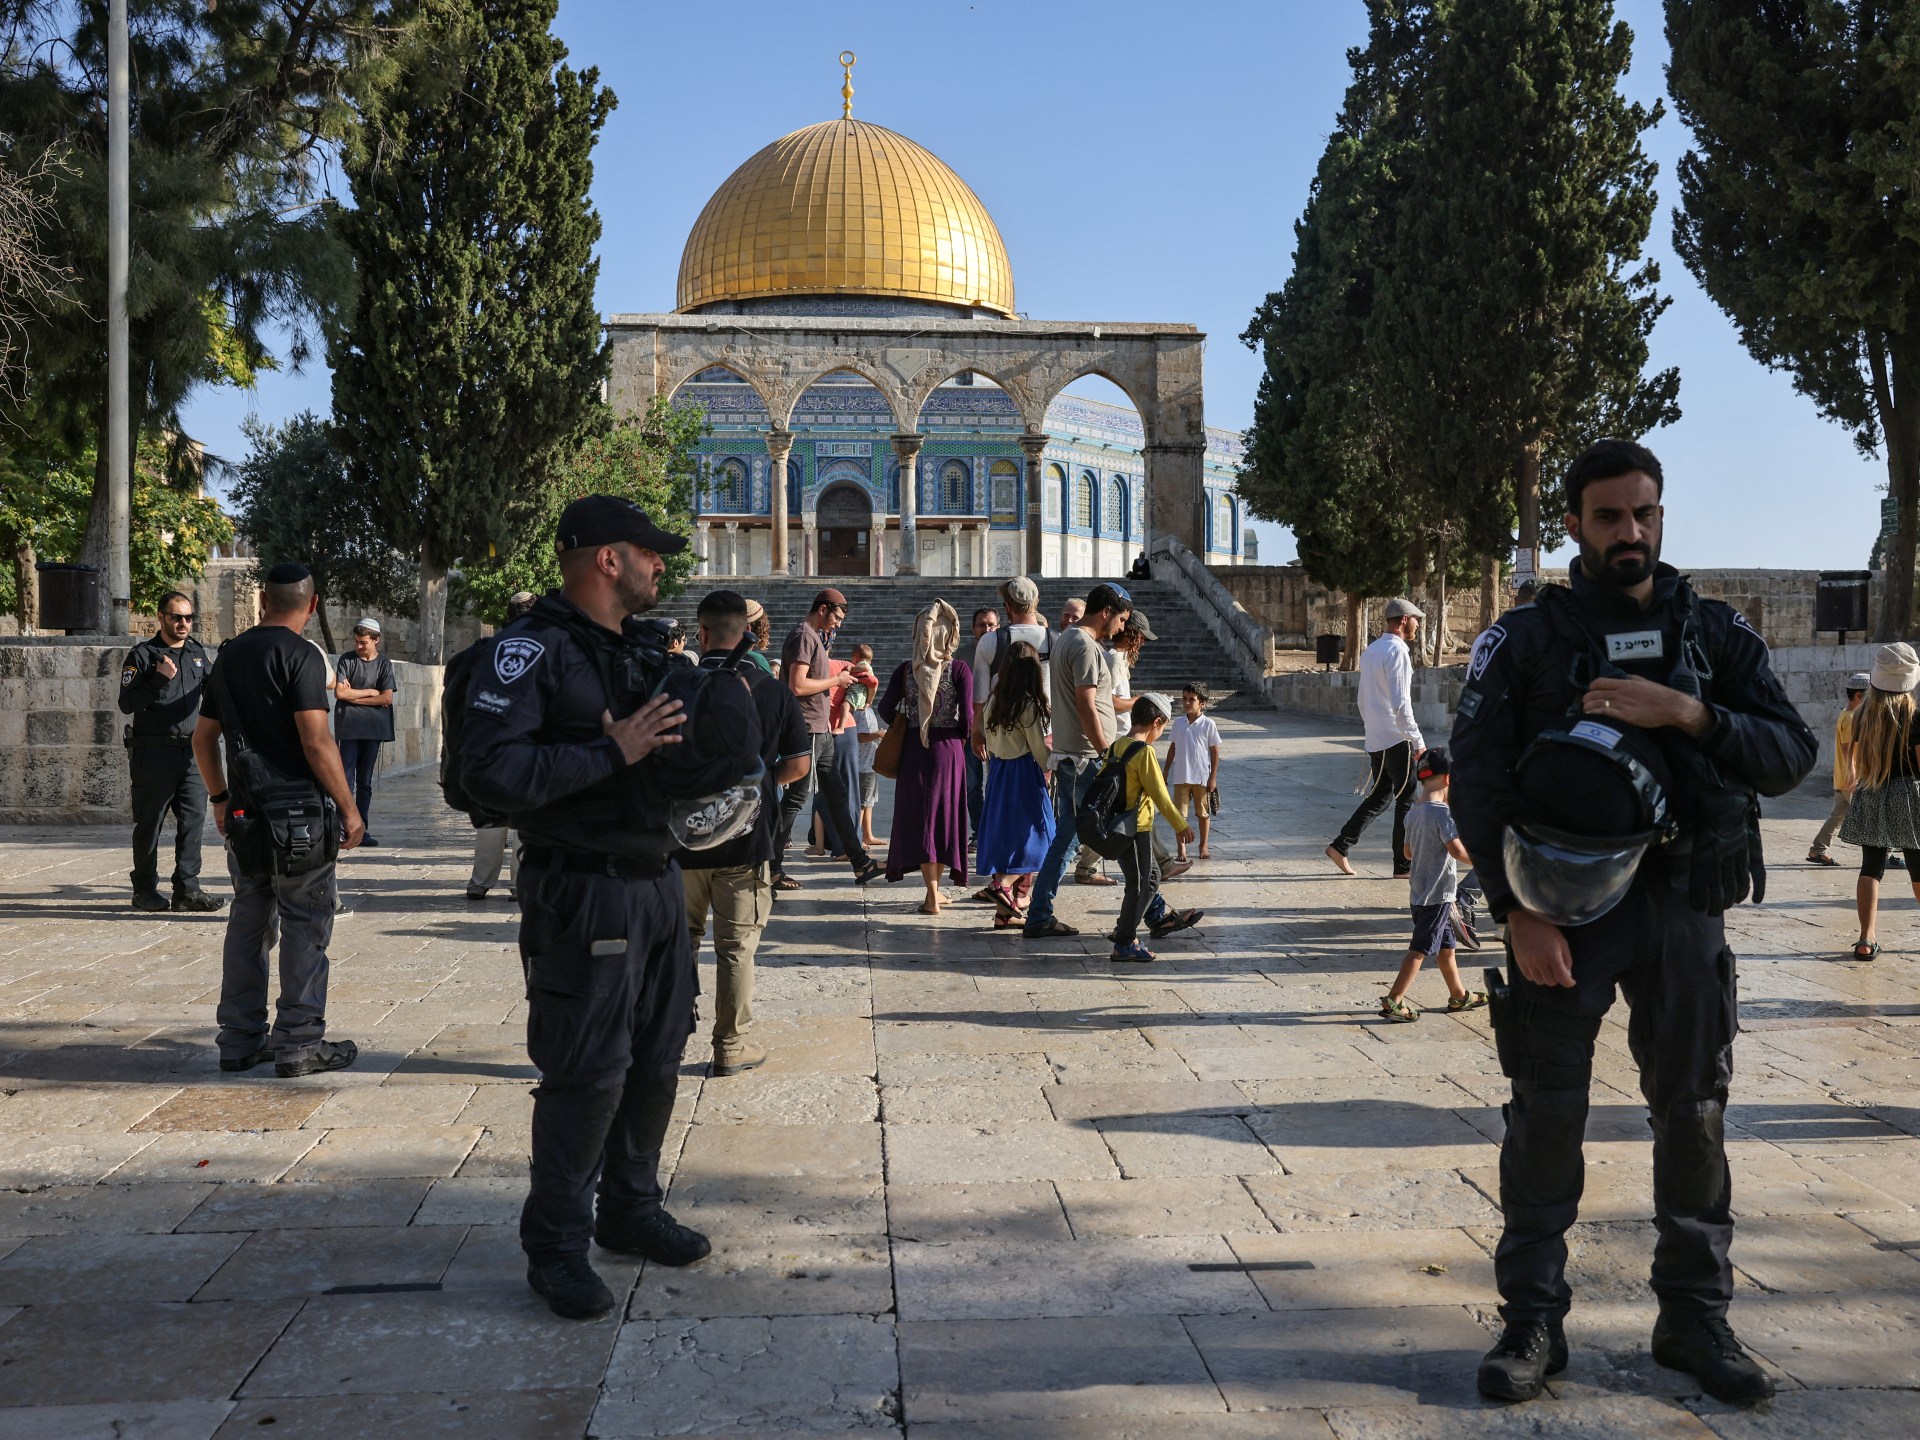 Al-Aqsa storming doesn’t bode nicely for spiritual rights in Israel